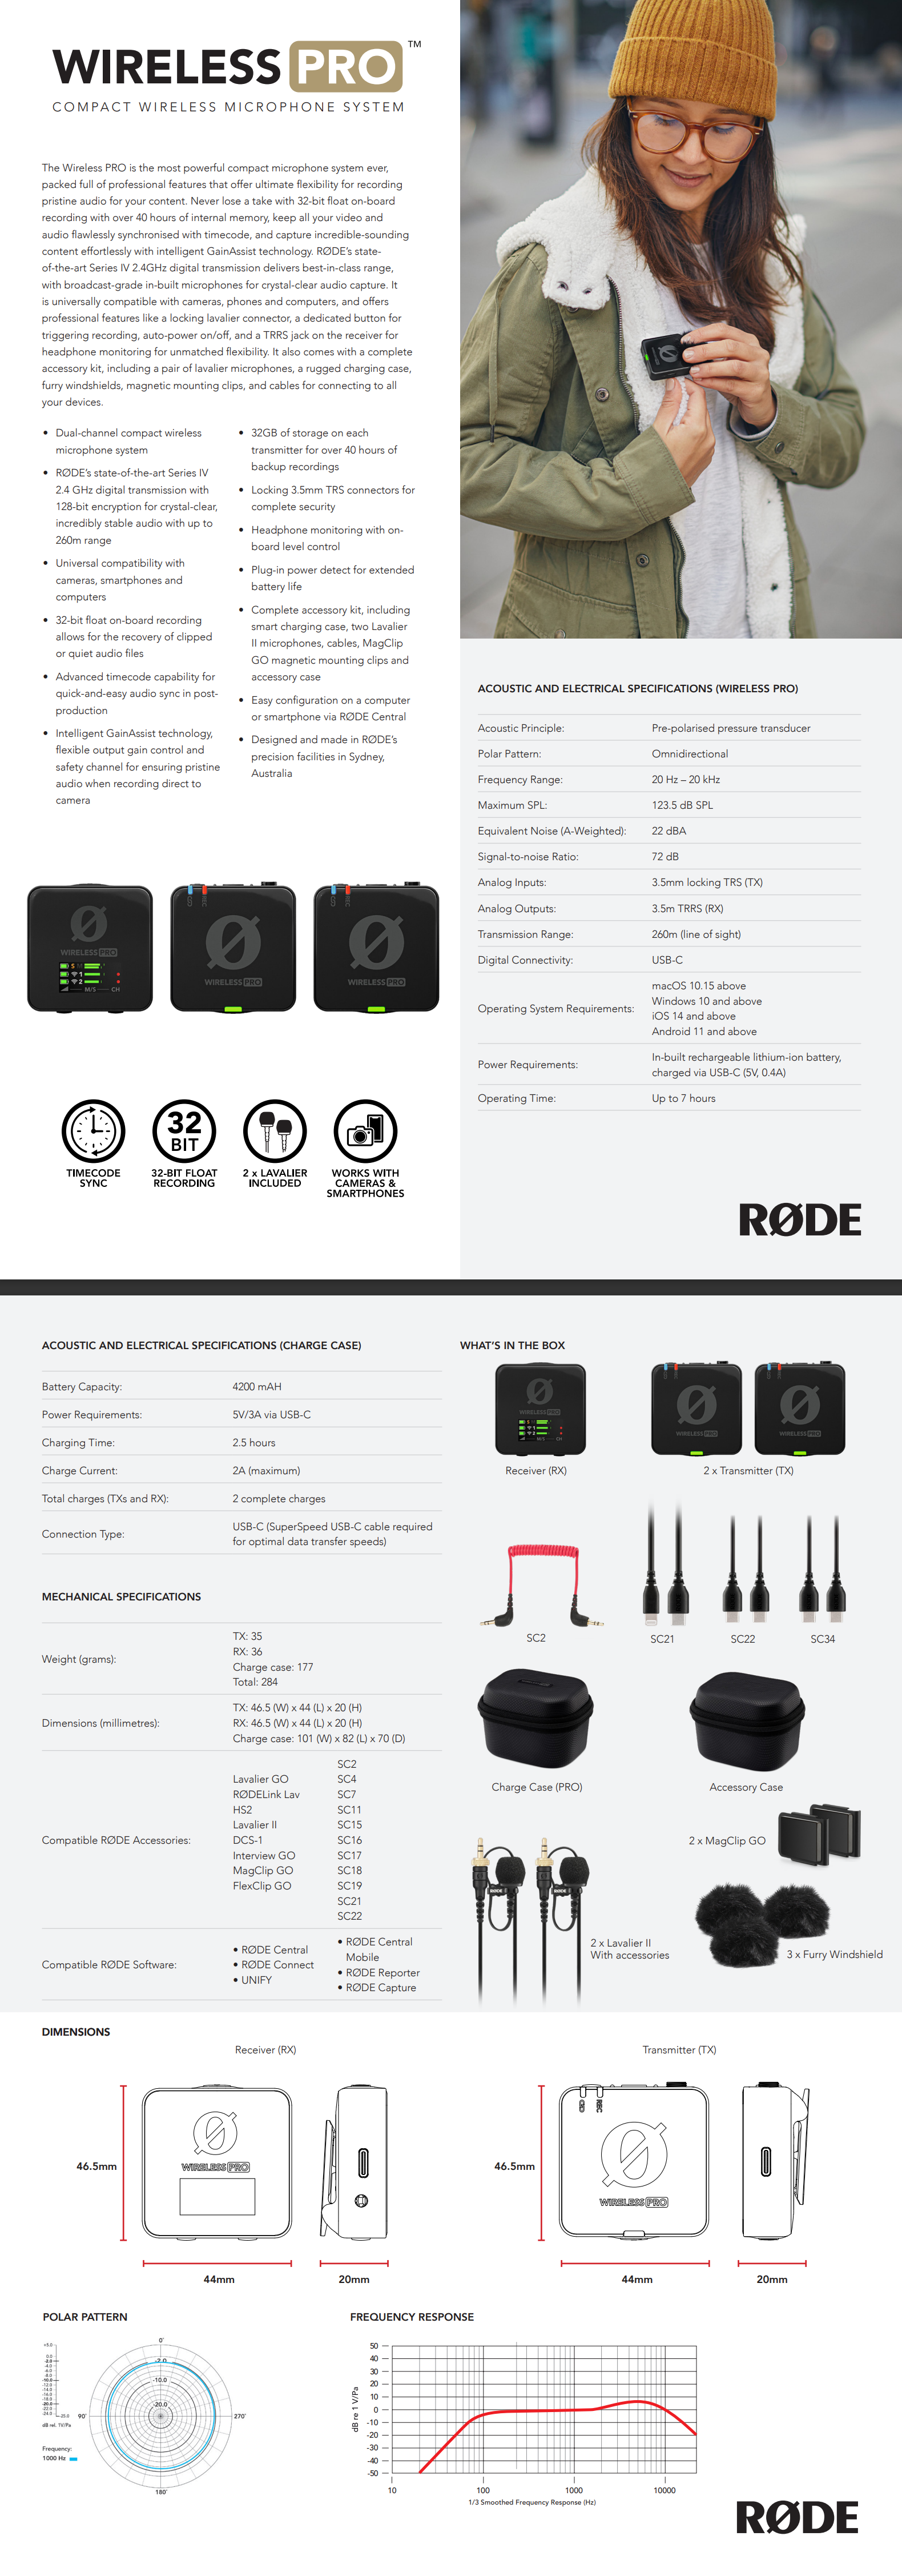 A large marketing image providing additional information about the product Rode WIPRO Wireless Pro Microphone - Additional alt info not provided